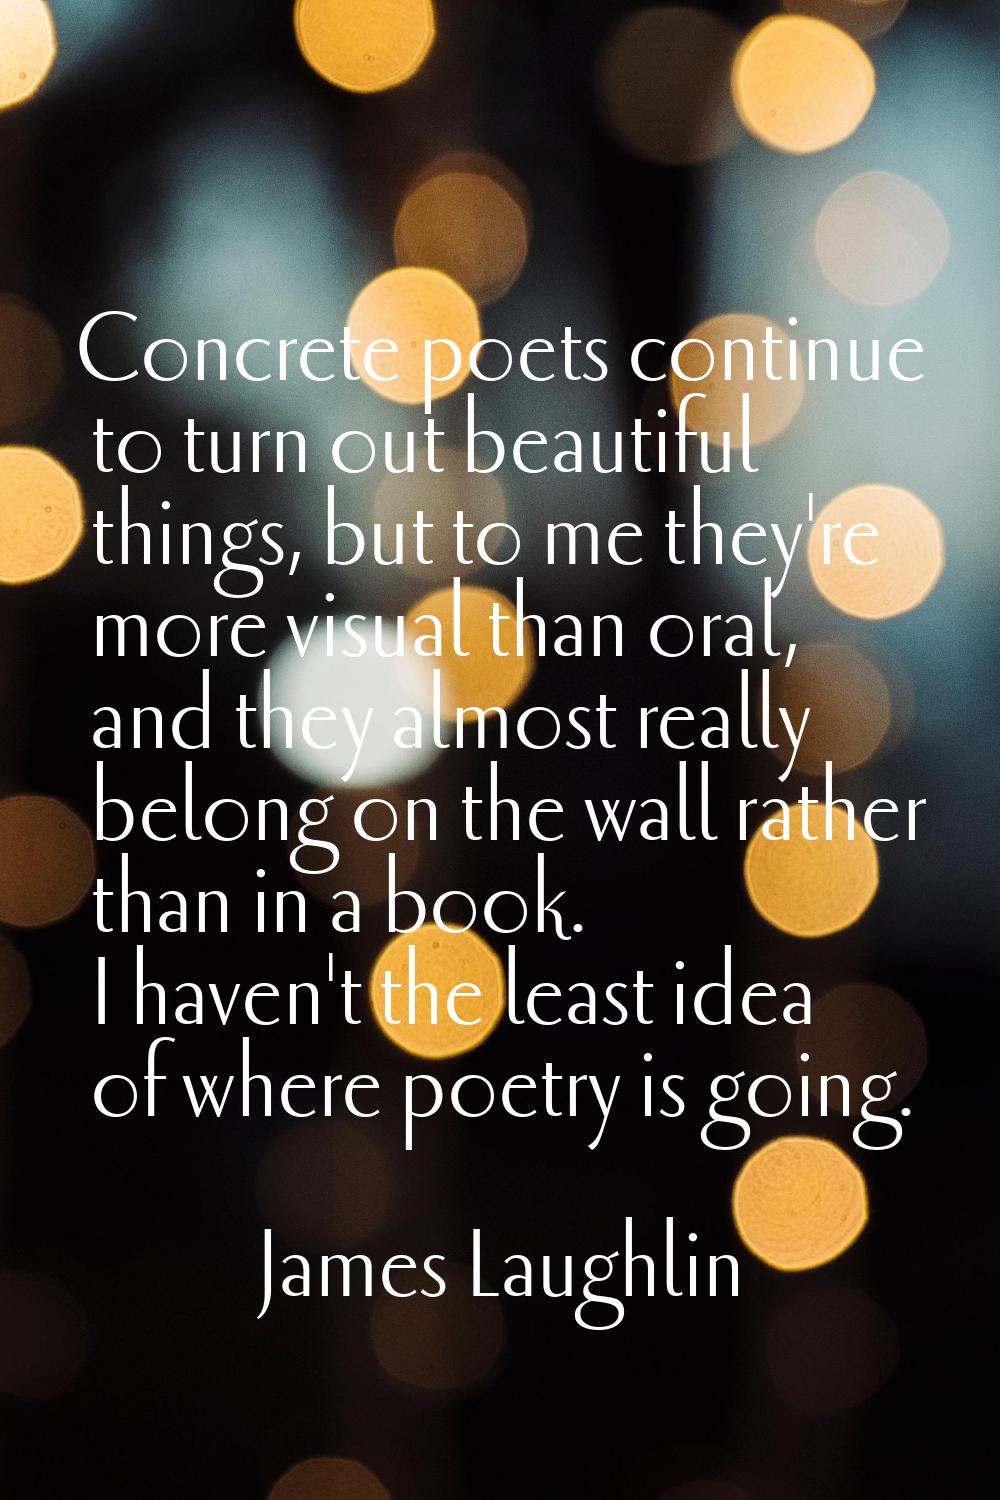 Concrete poets continue to turn out beautiful things, but to me they're more visual than oral, and 